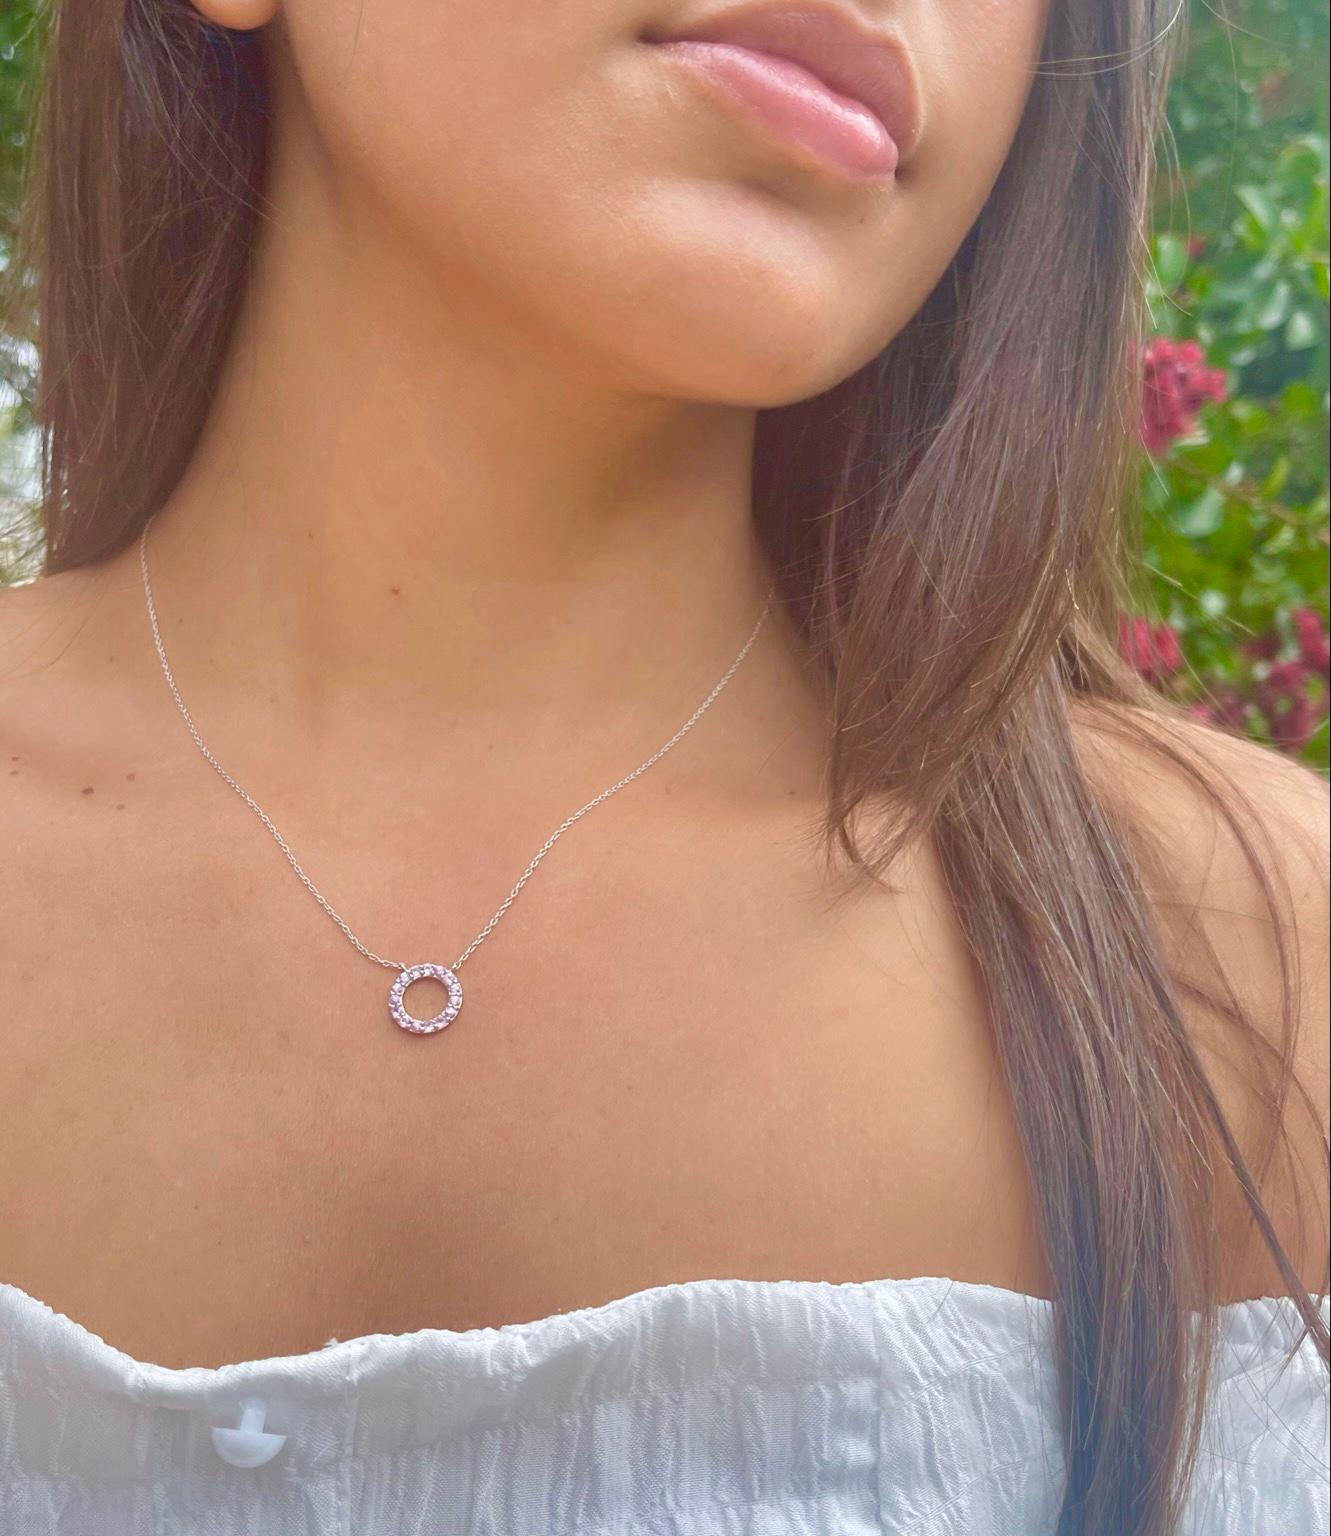 Genuine pink sapphires in a classic circle shape is the perfect necklace to layer or wear on its own. Enjoy this necklace as an everyday piece! Made with .925 Sterling Silver. 1.79 total carats. External diameter of the circle measures 0.5